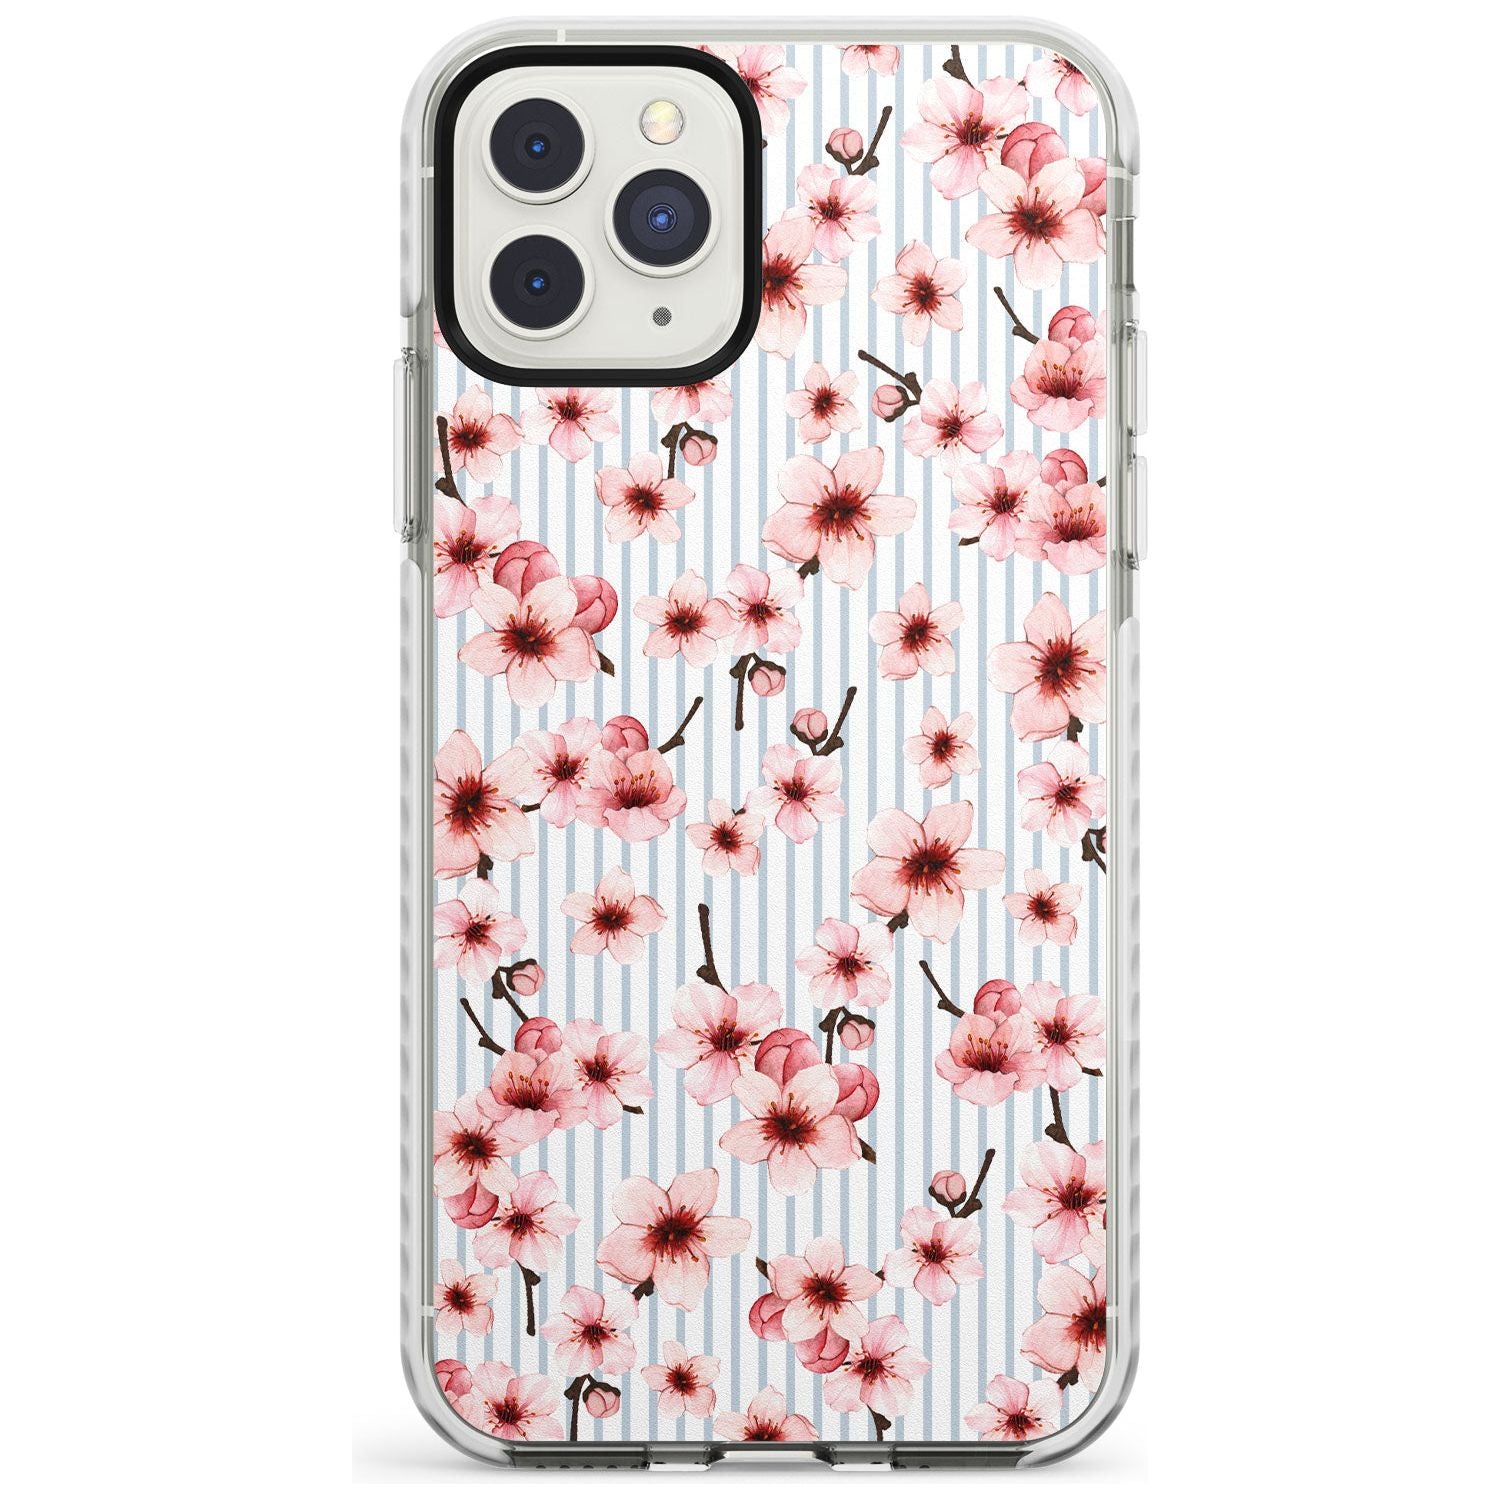 Cherry Blossoms on Blue Stripes Pattern Impact Phone Case for iPhone 11 Pro Max